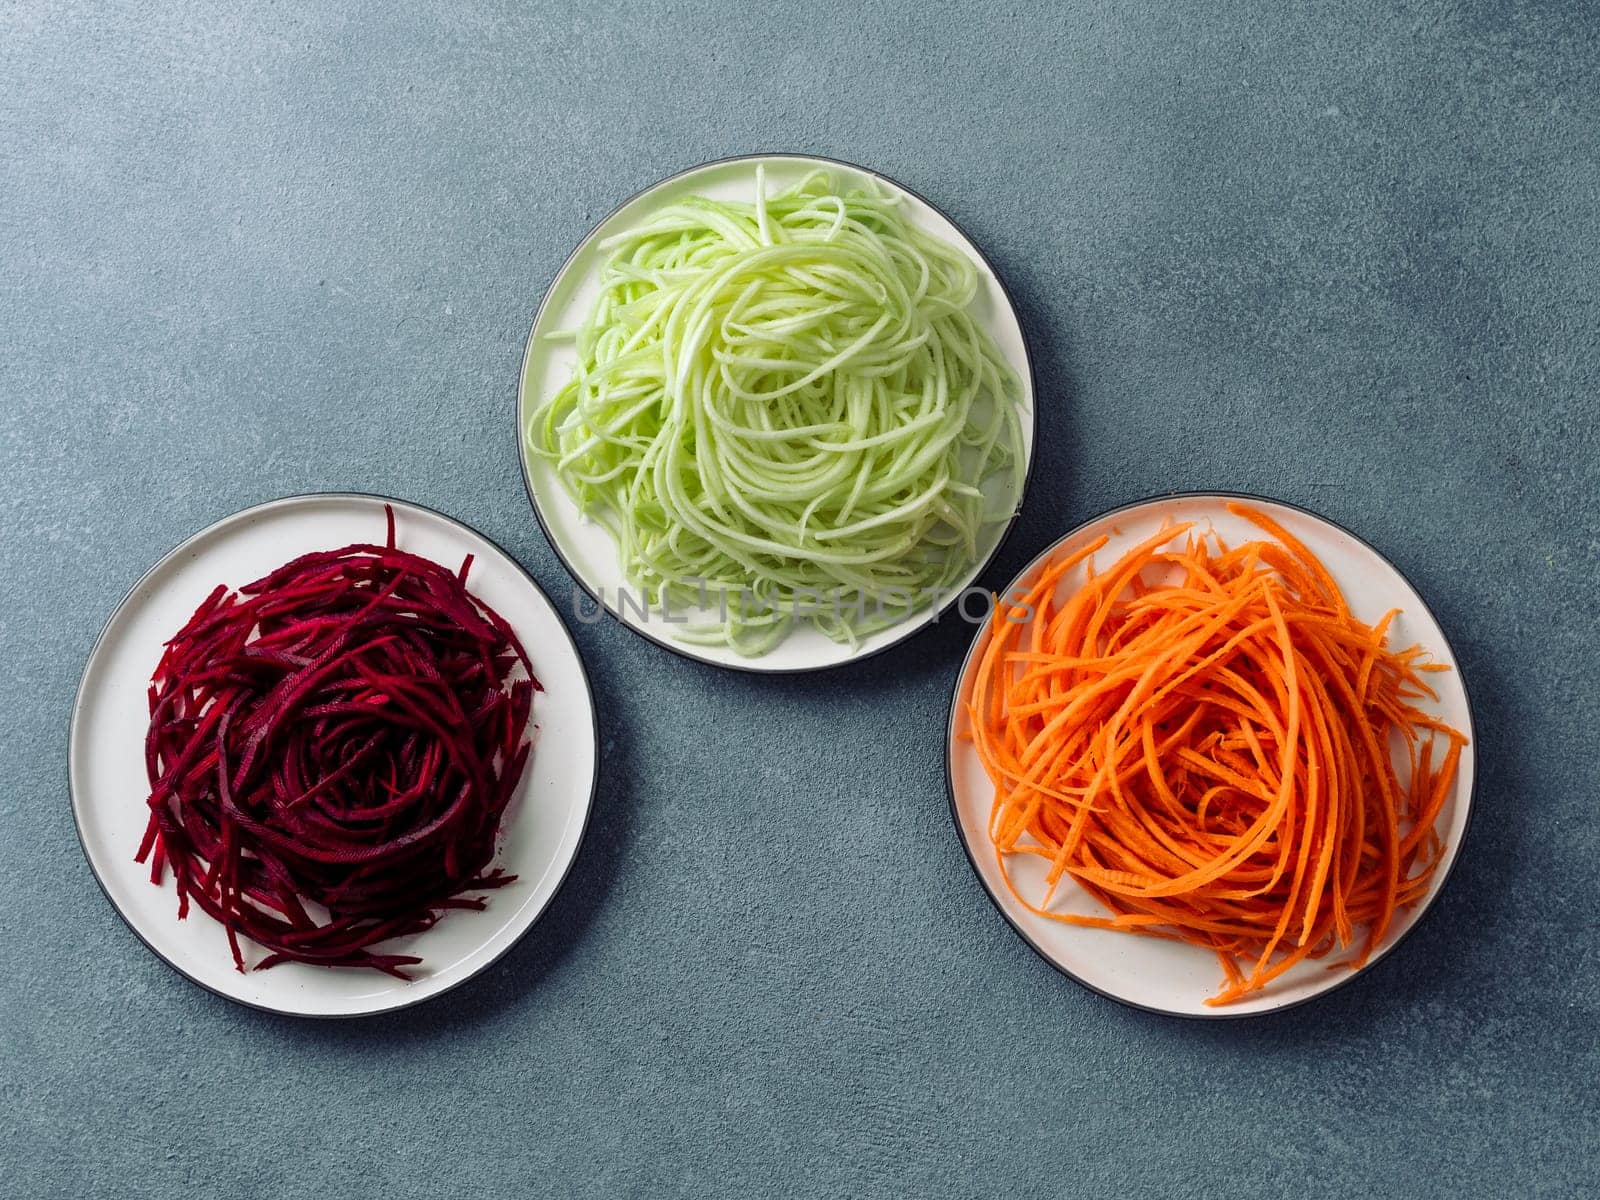 Vegetable noodles - zucchini, carrot, and beetroot noodles on plate over gray stone background. Clean eating, raw vegetarian, food concept. Copy space for text. Top view or flat lay.